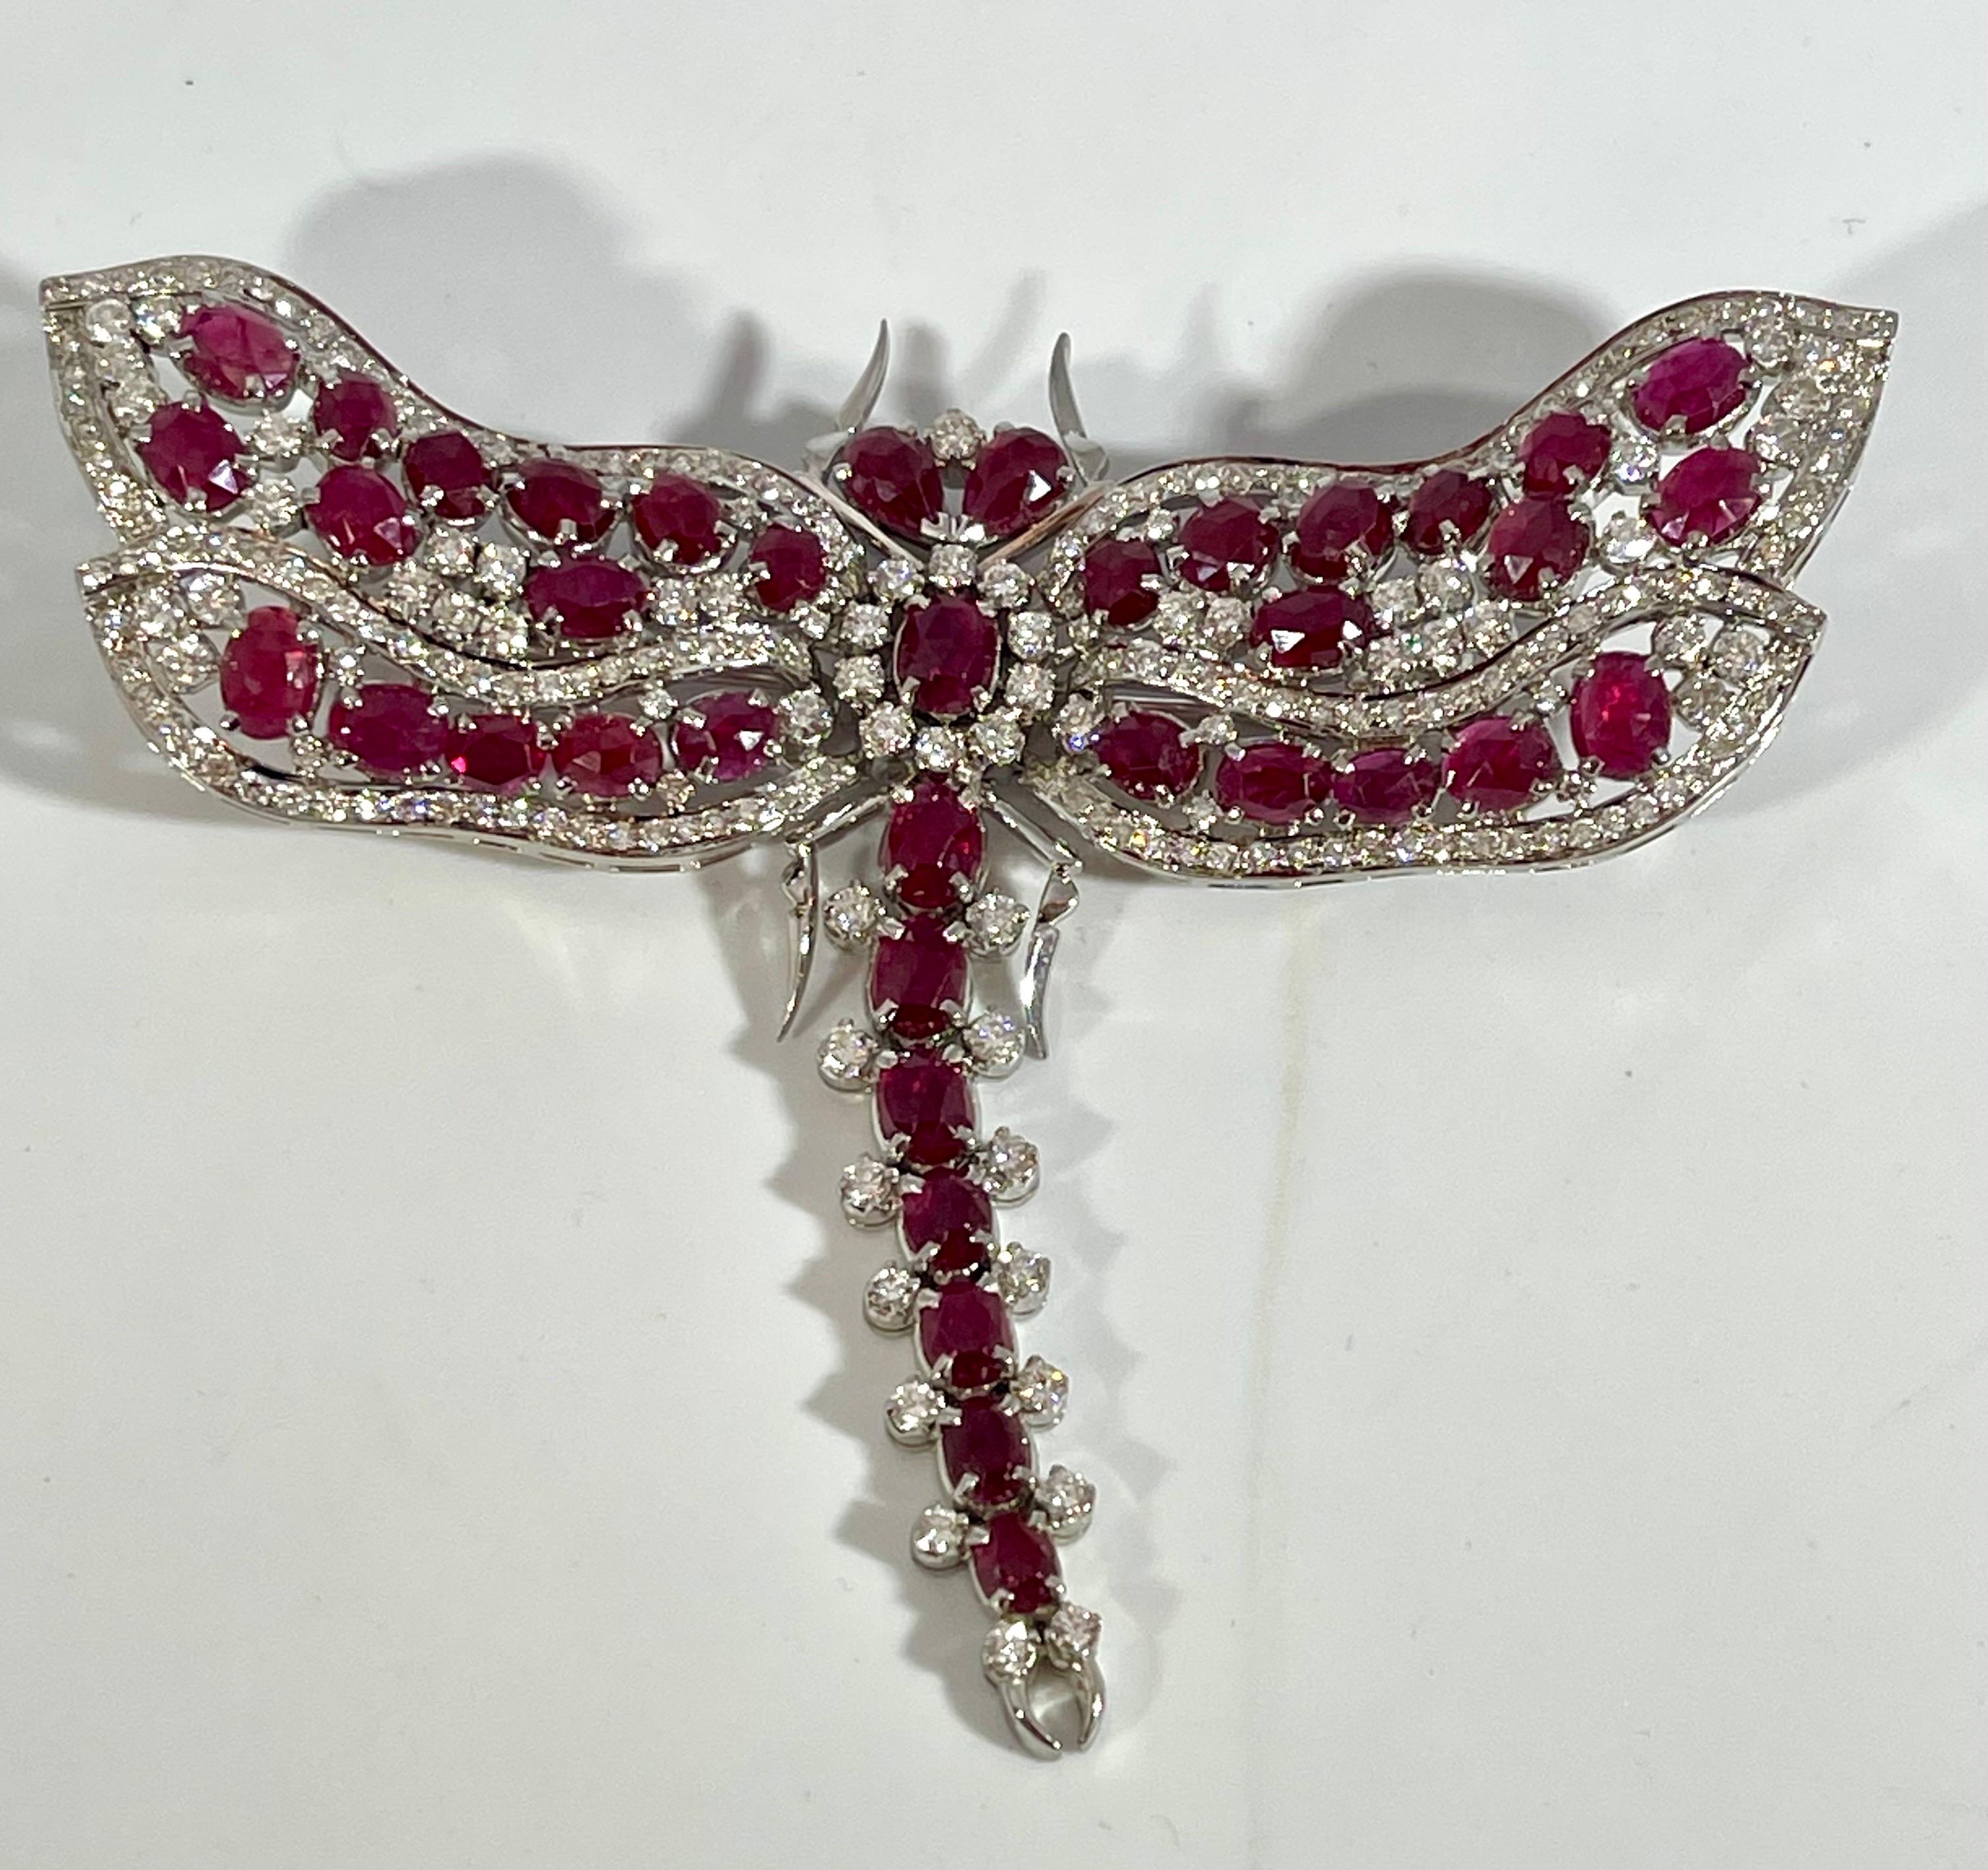 Natural 20 Ct Burma Ruby & 10 Ct Diamond Butterfly 18 Kt White Gold Pin/Brooch For Sale 1